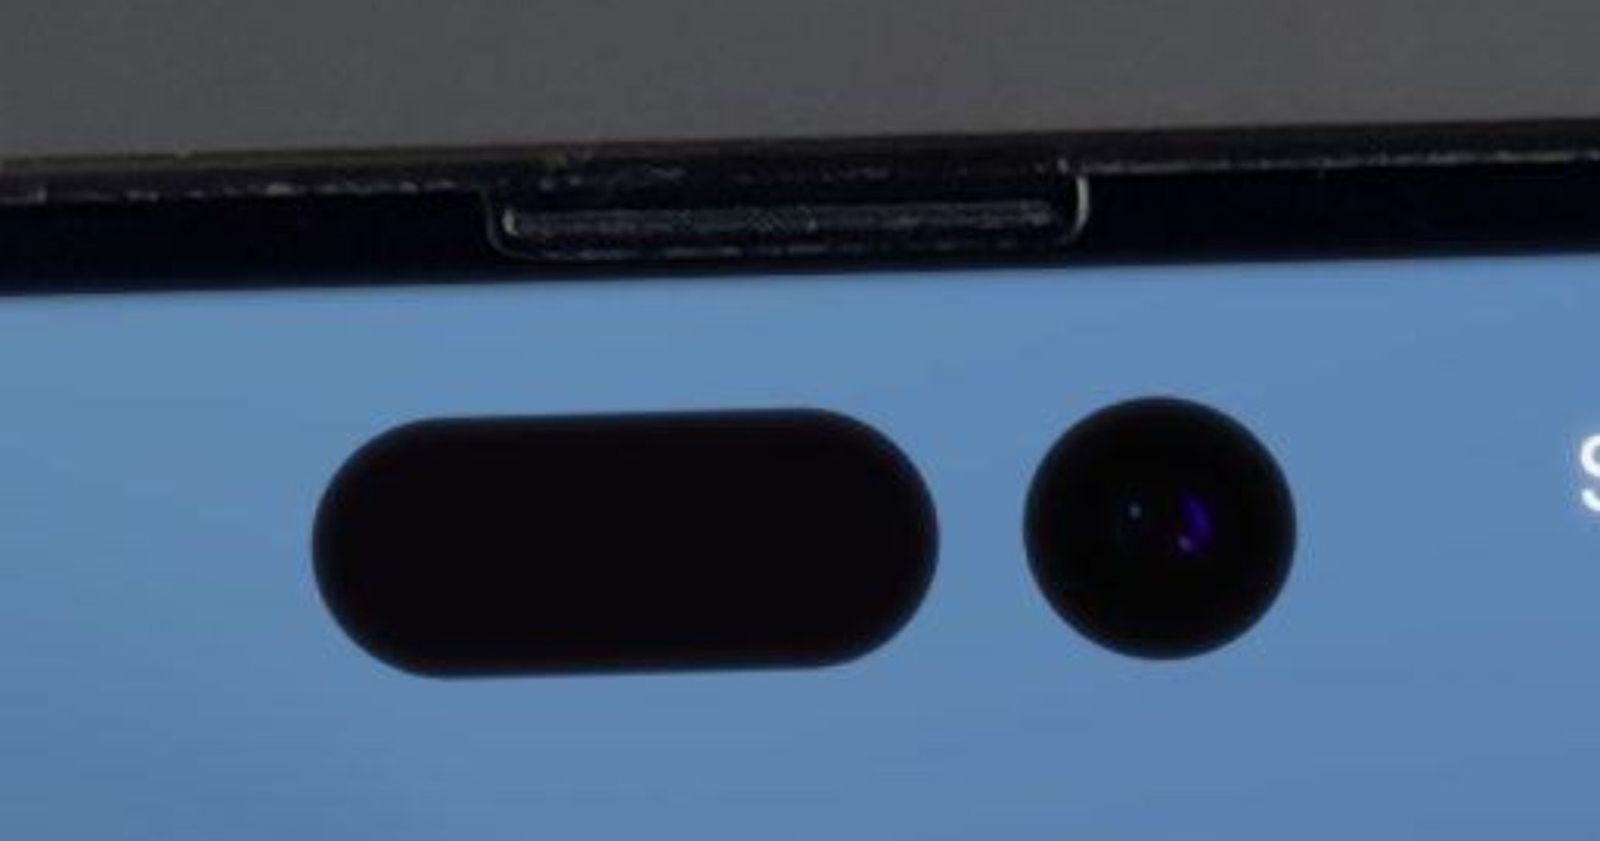 iPhone 14 Pro's new pill and hole design could display camera and microphone privacy indicators